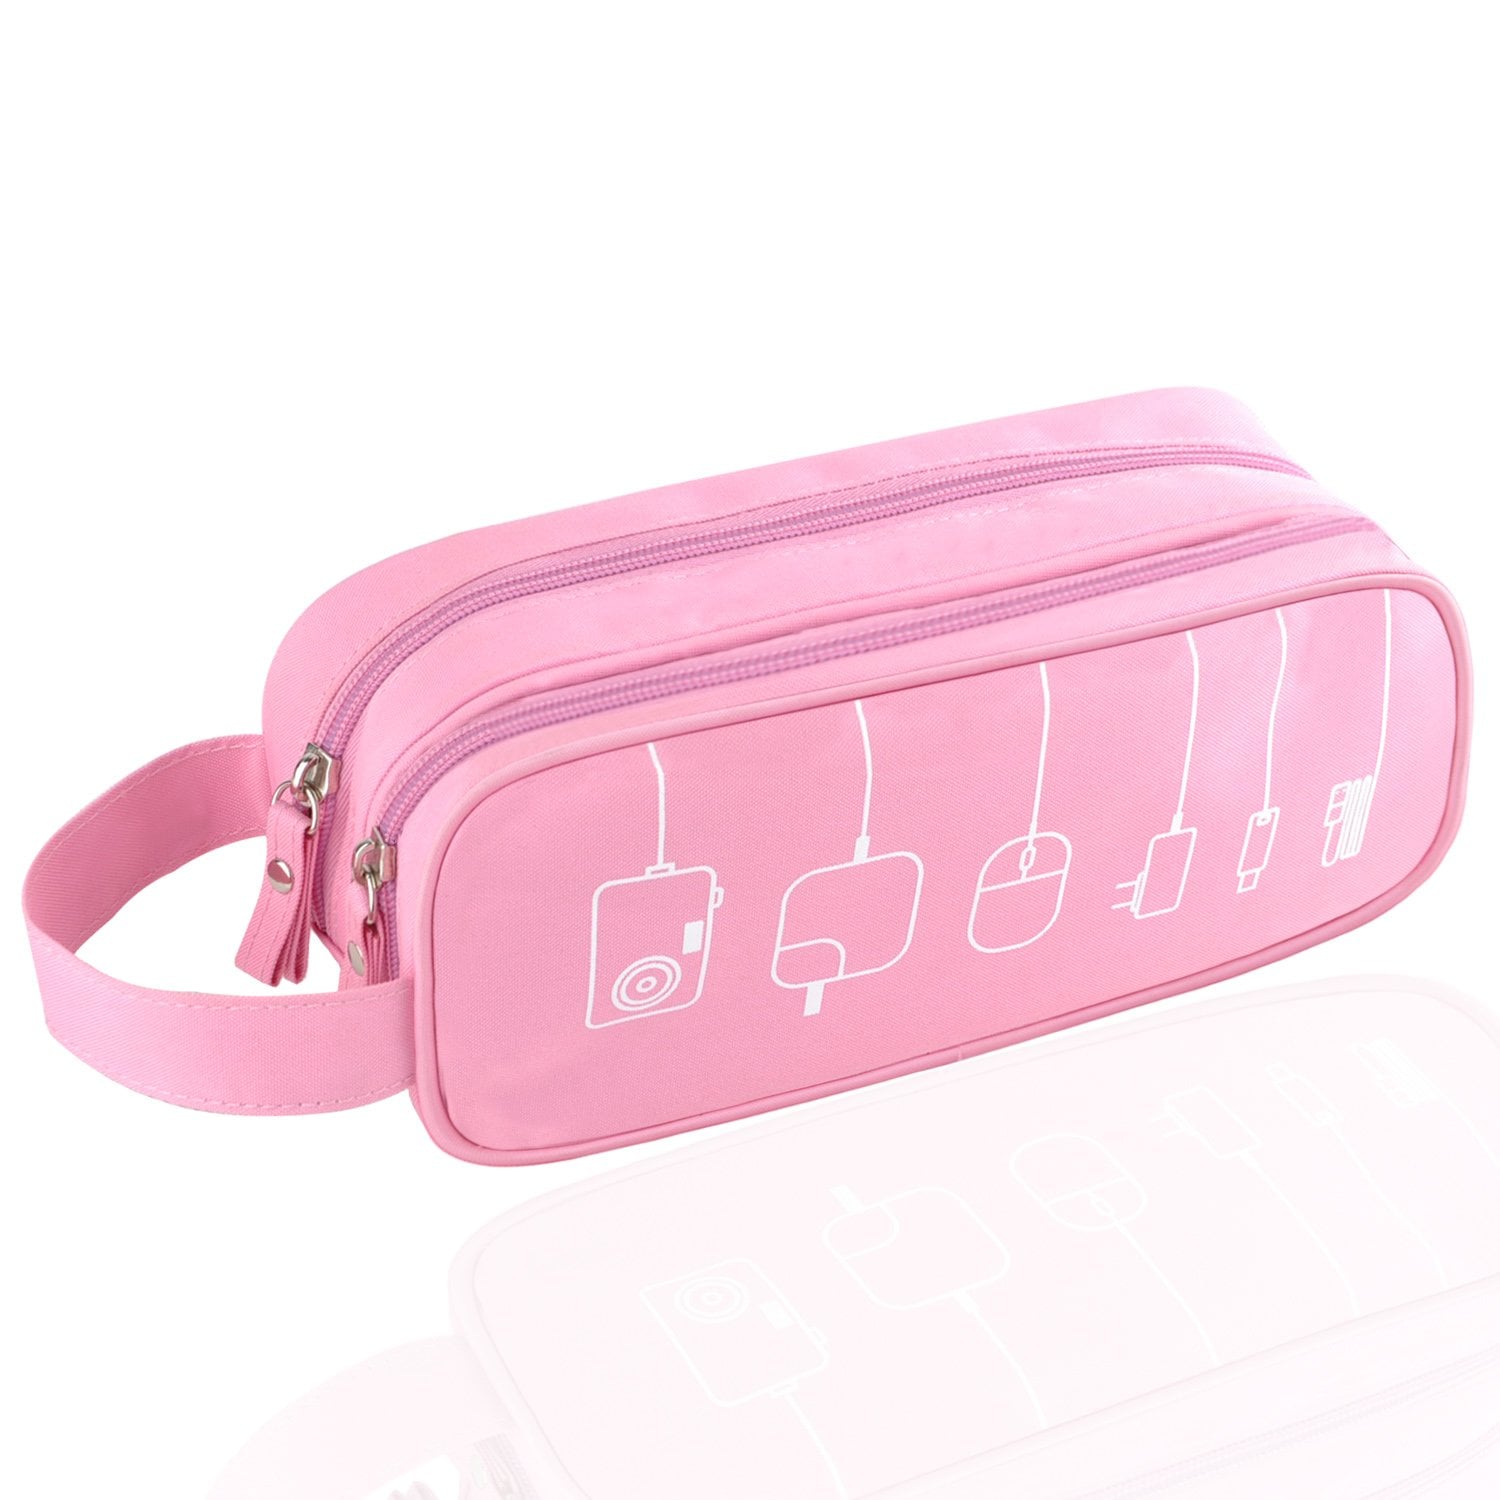 Travel Cord Organizer Pouch - Pink – Funky Monkey Fashion Accessories